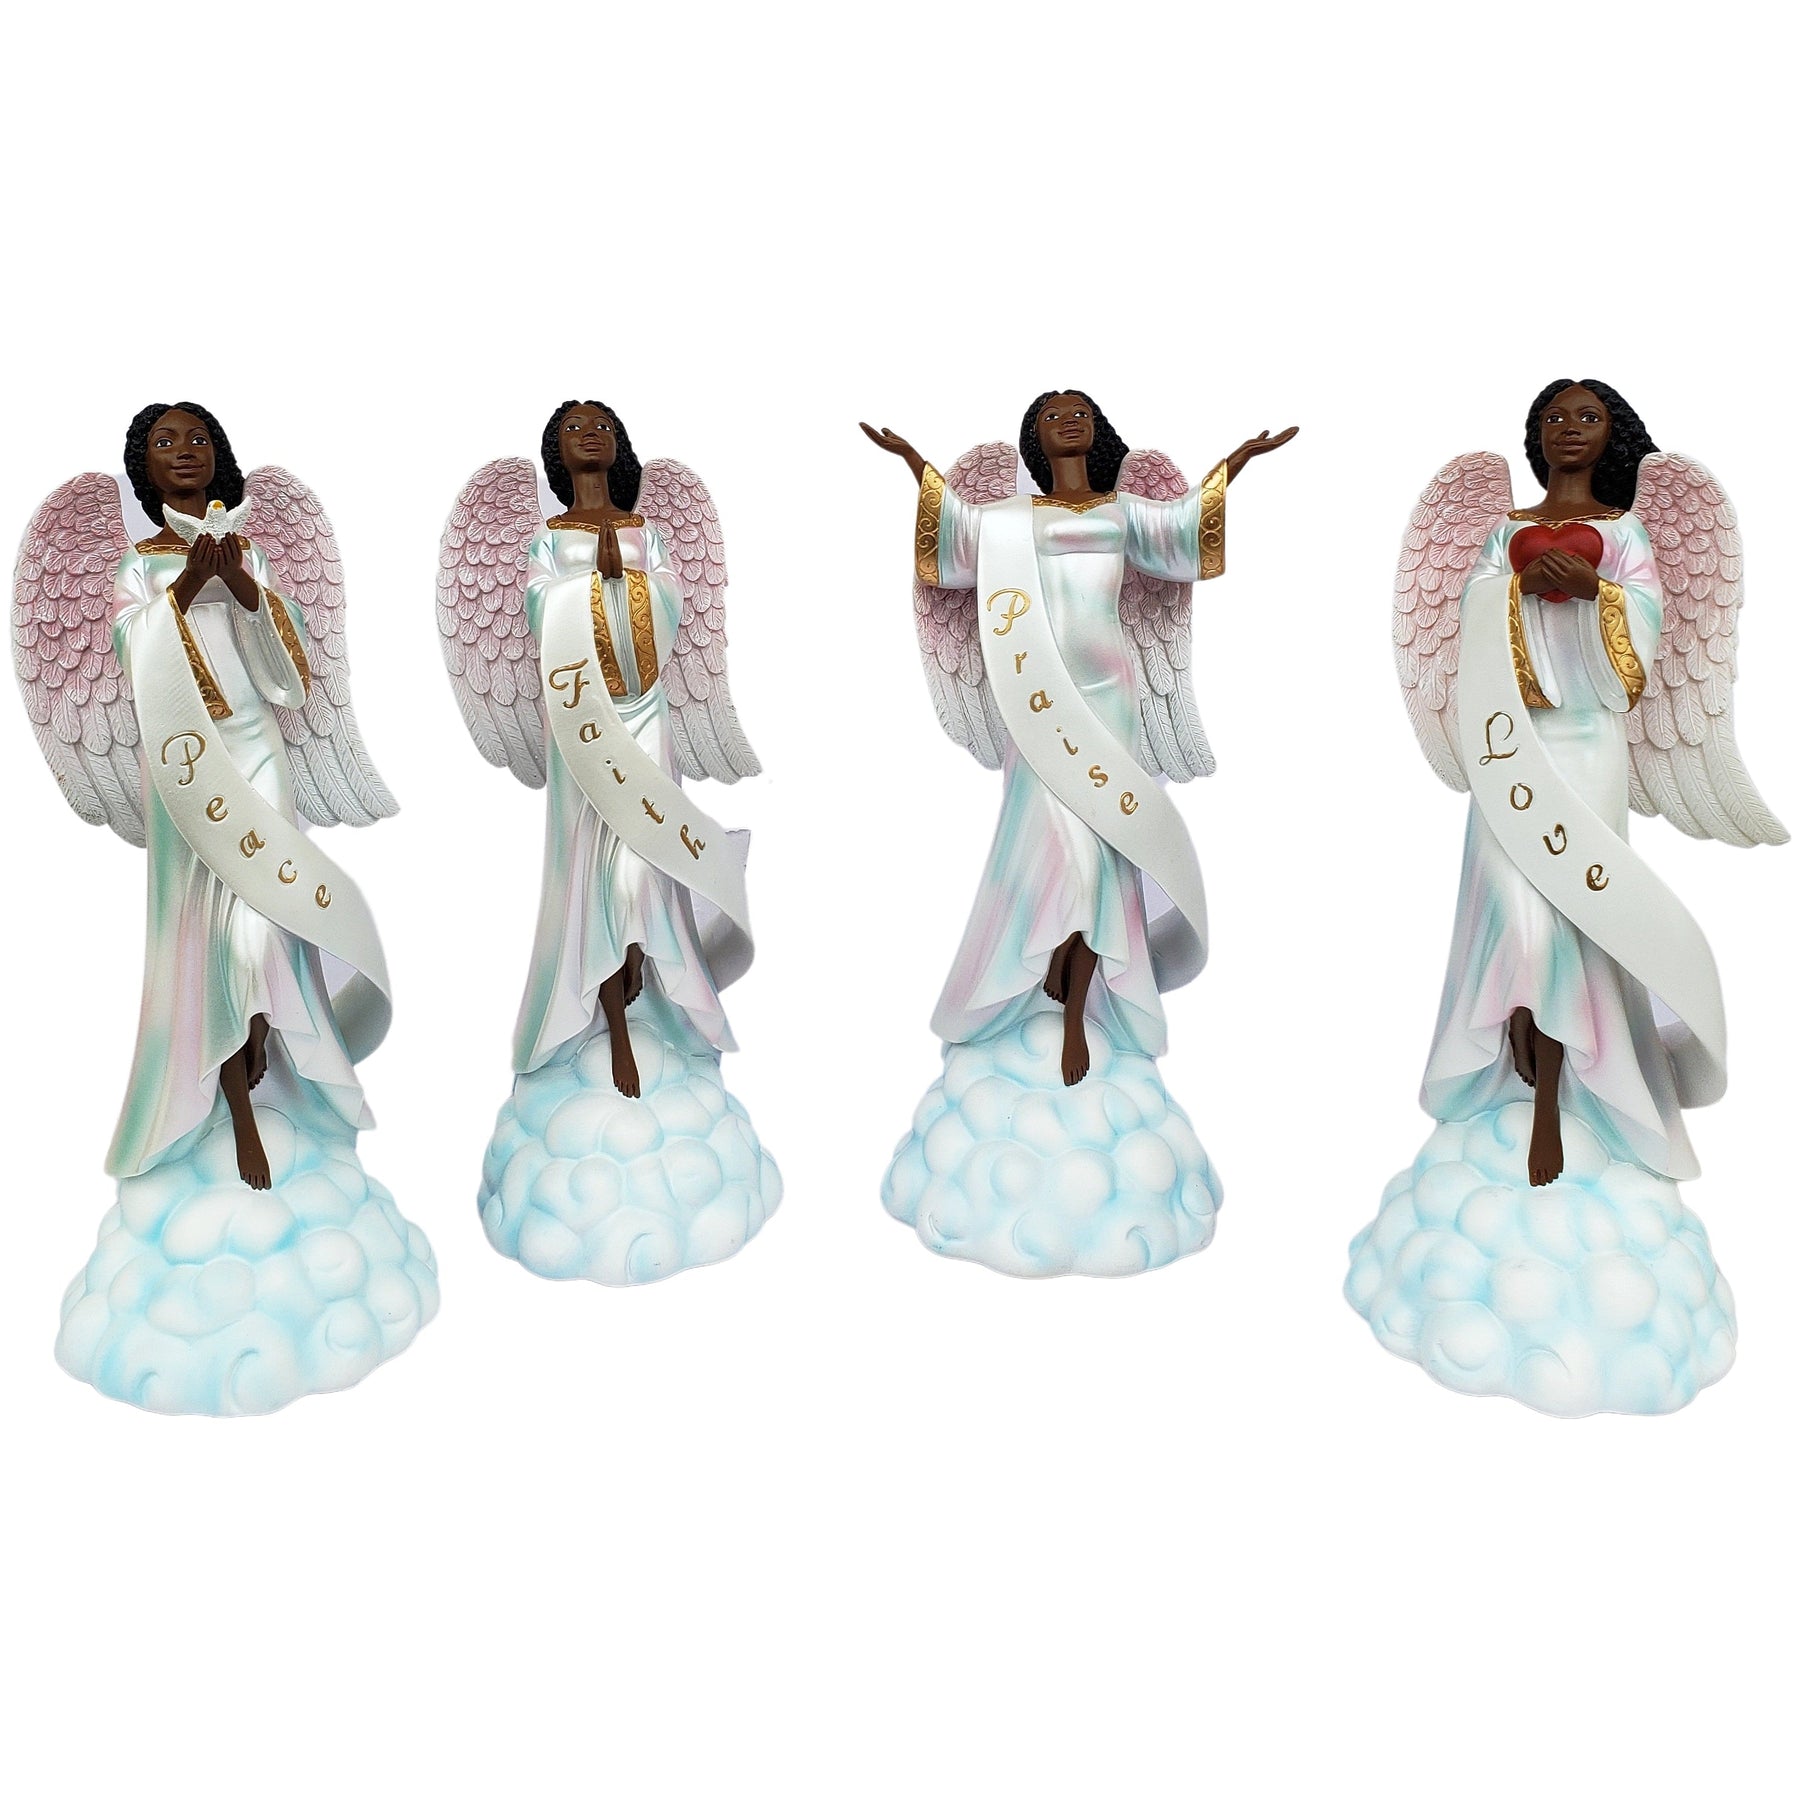 5 of 7: Praise and Worship Inspirational Angel Series